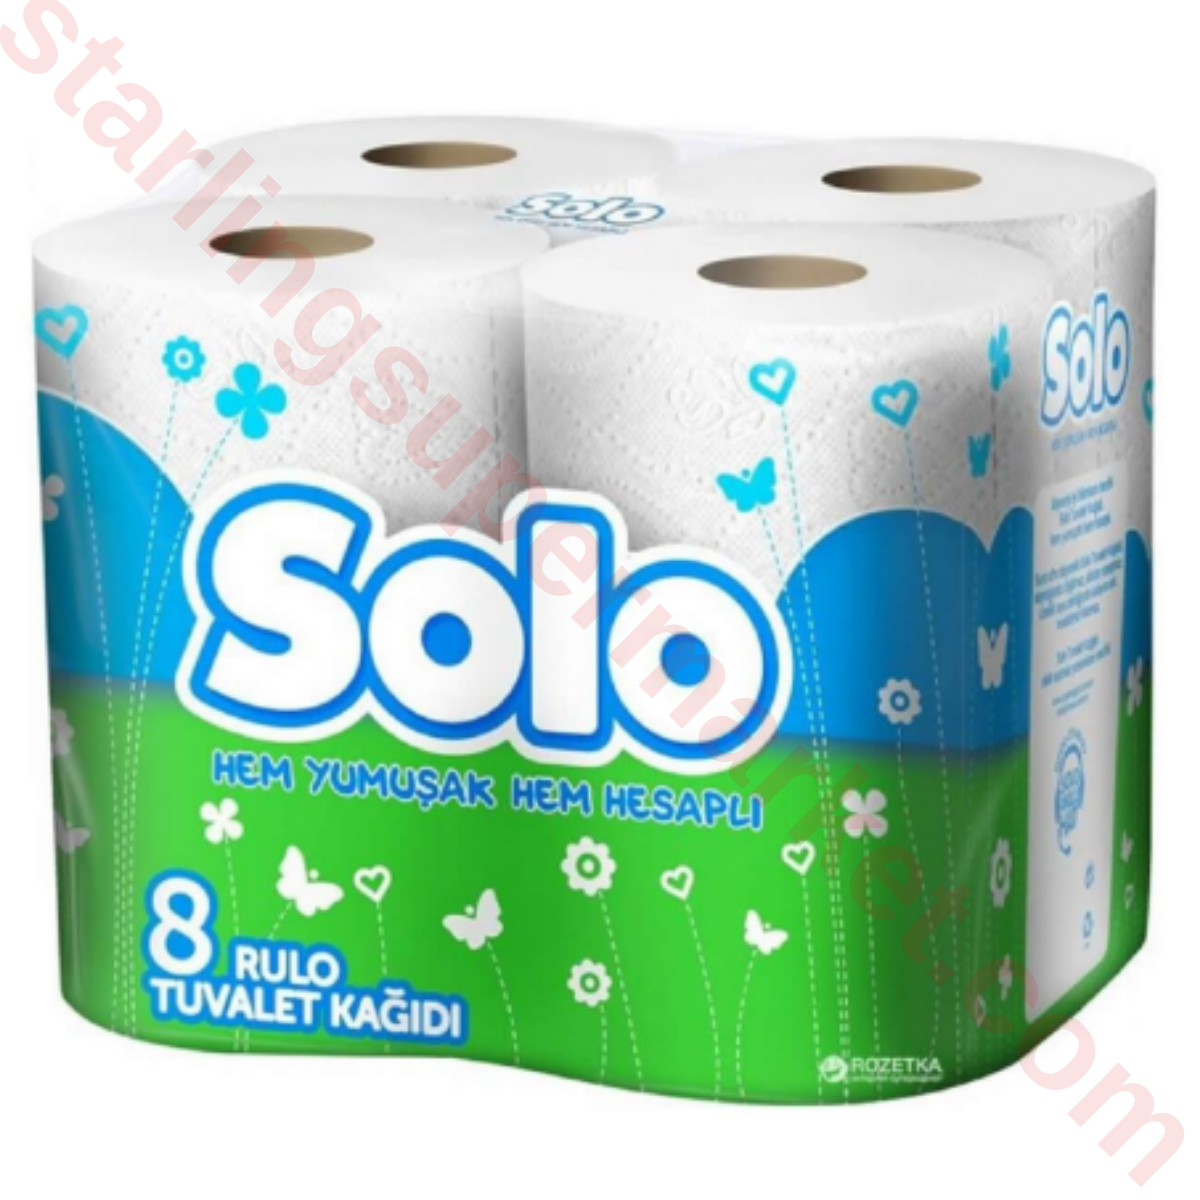 SOLO TOILET PAPER 8 PACK